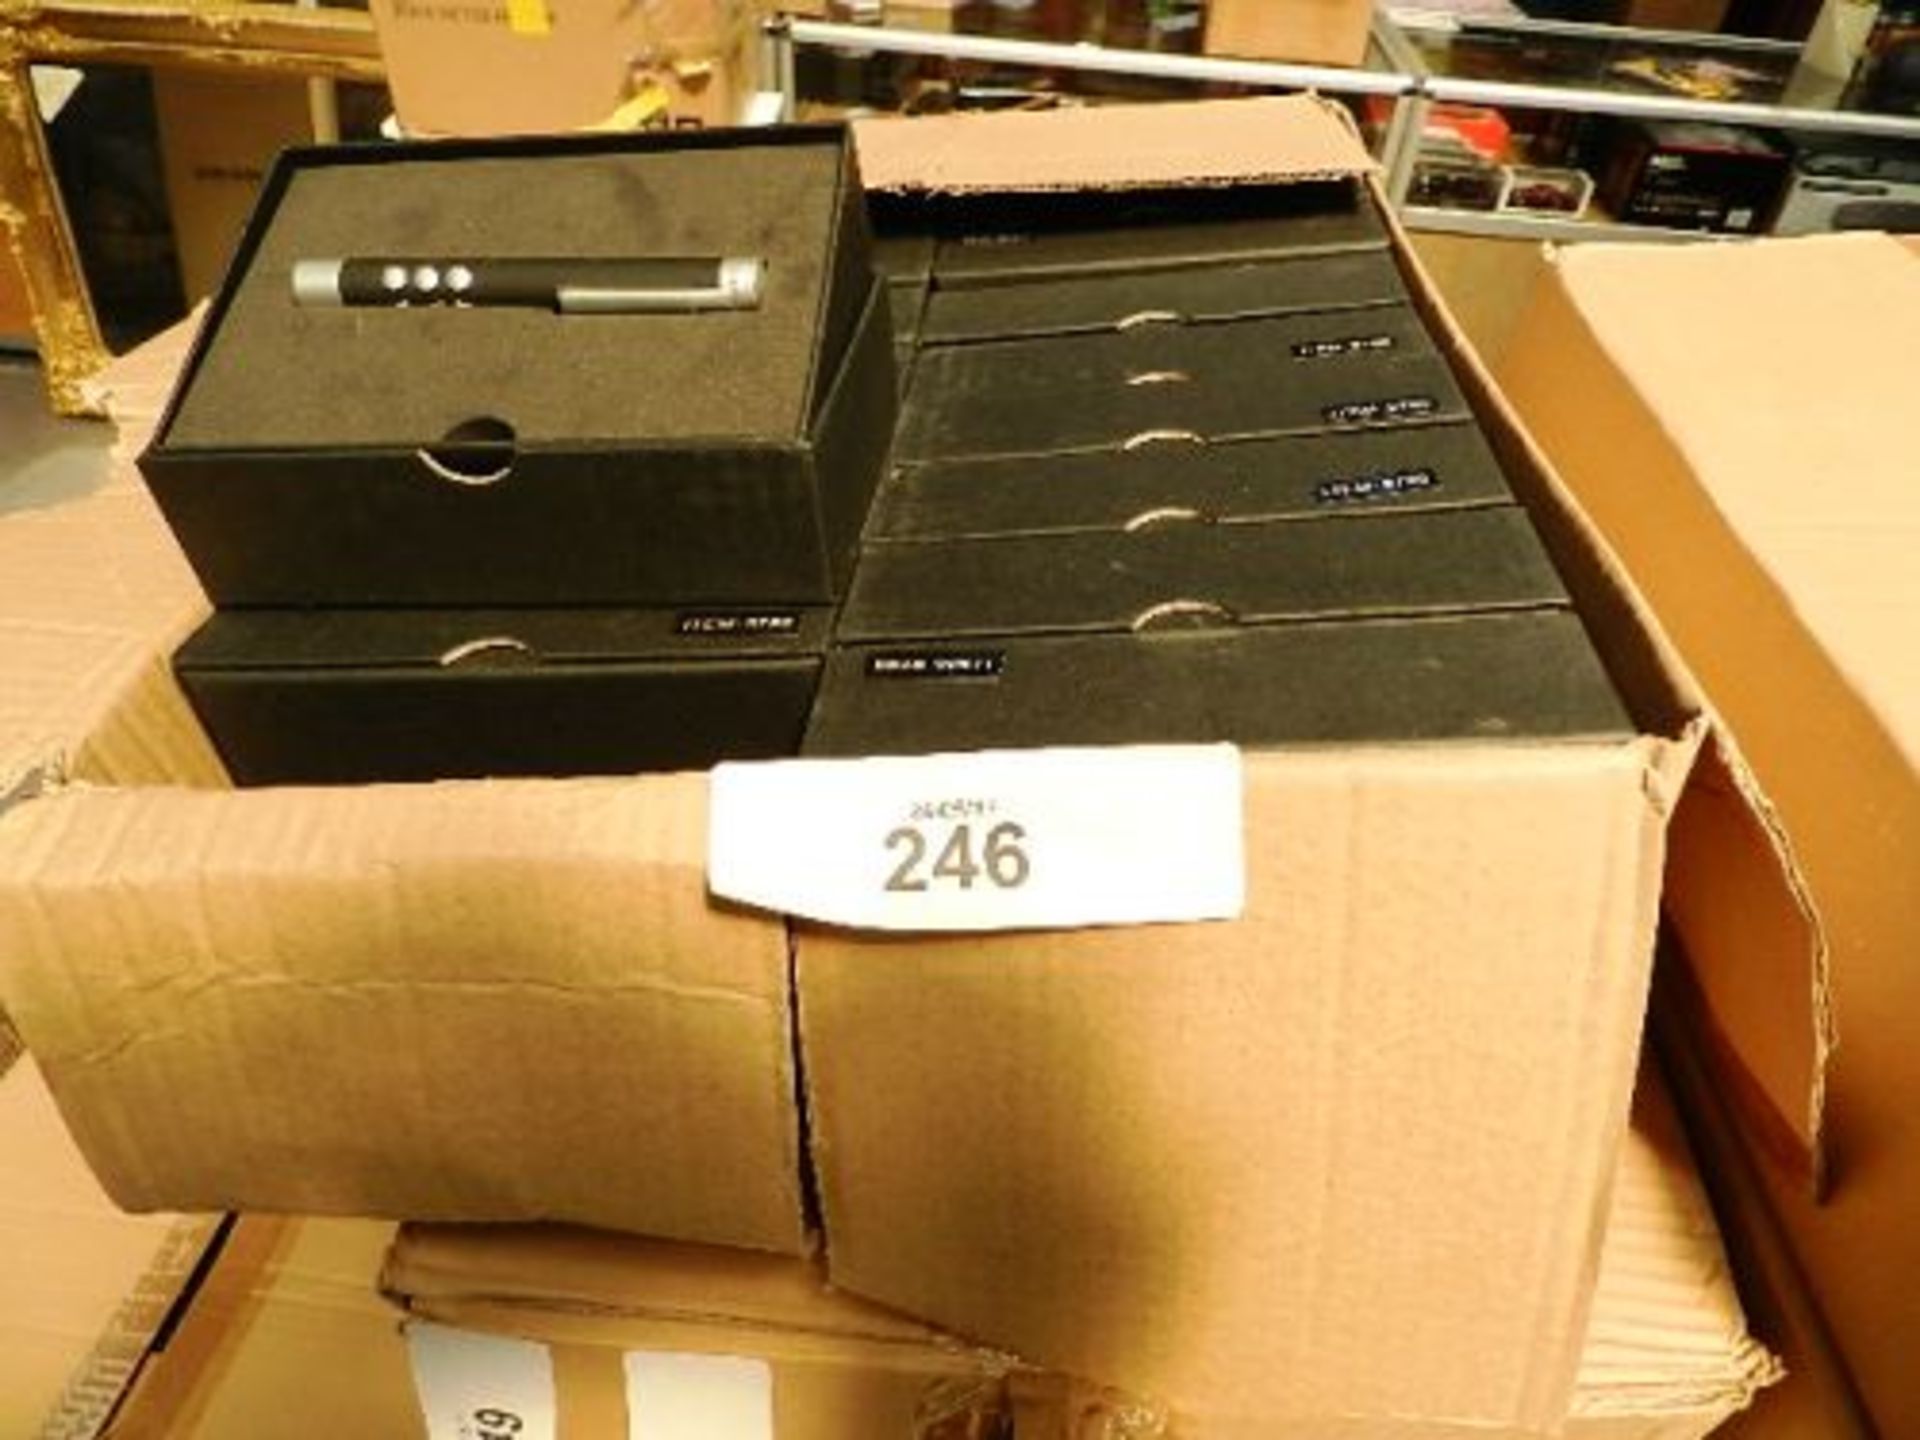 A box containing approximately 20 x Dell Intel Puntero laser pens, item 9790, in presentation